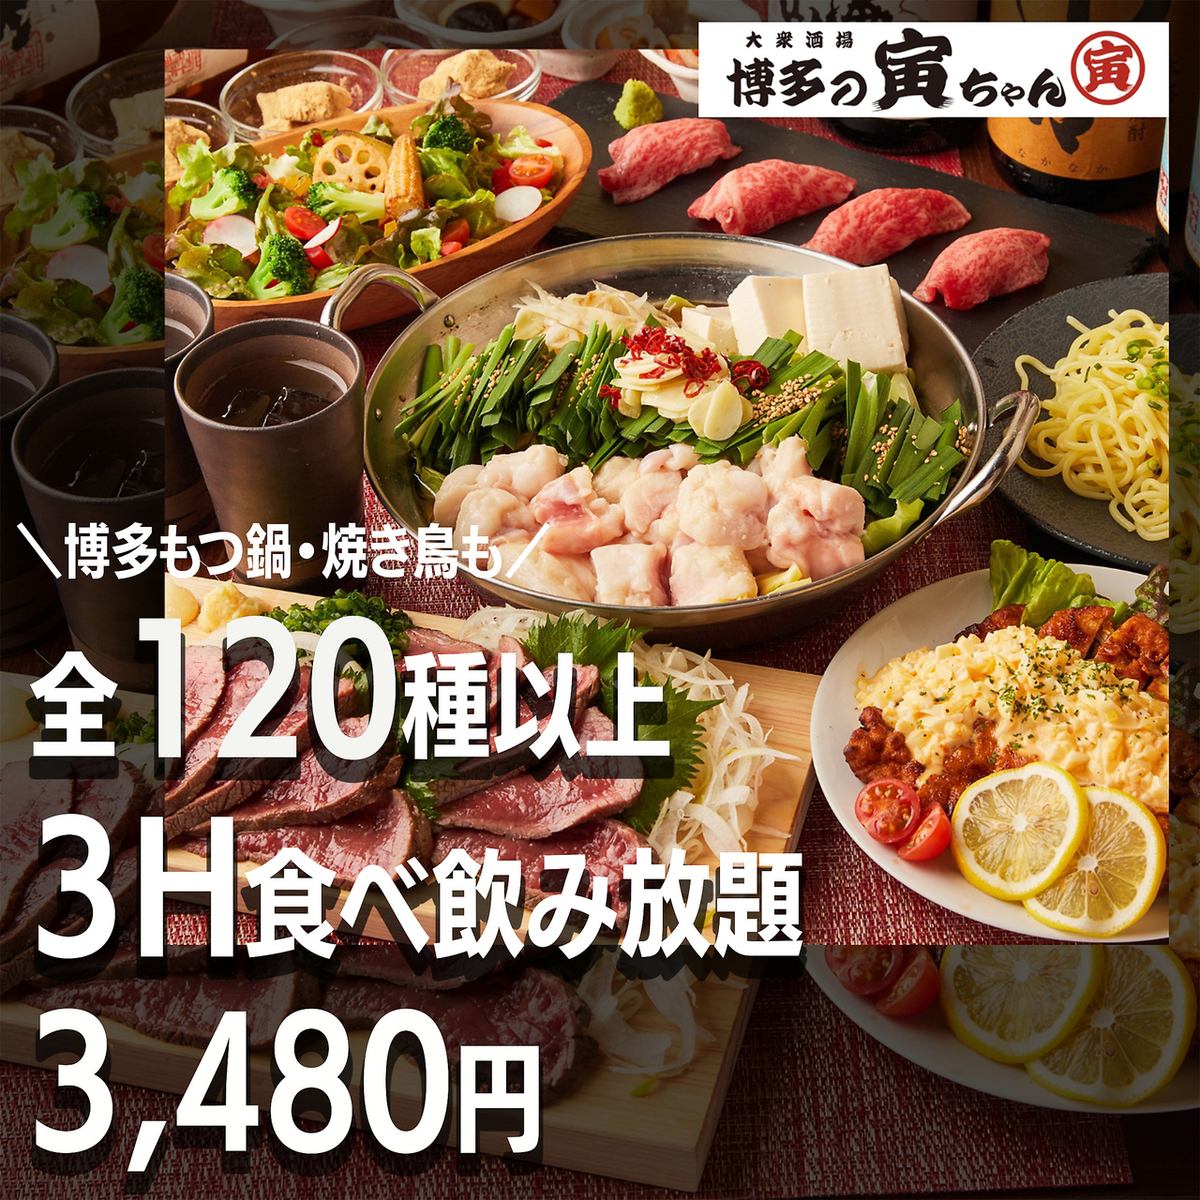 3 minutes from Tenjin Station♪ A neo popular izakaya where you can enjoy all-you-can-eat authentic motsu nabe and charcoal-grilled yakitori is now open!